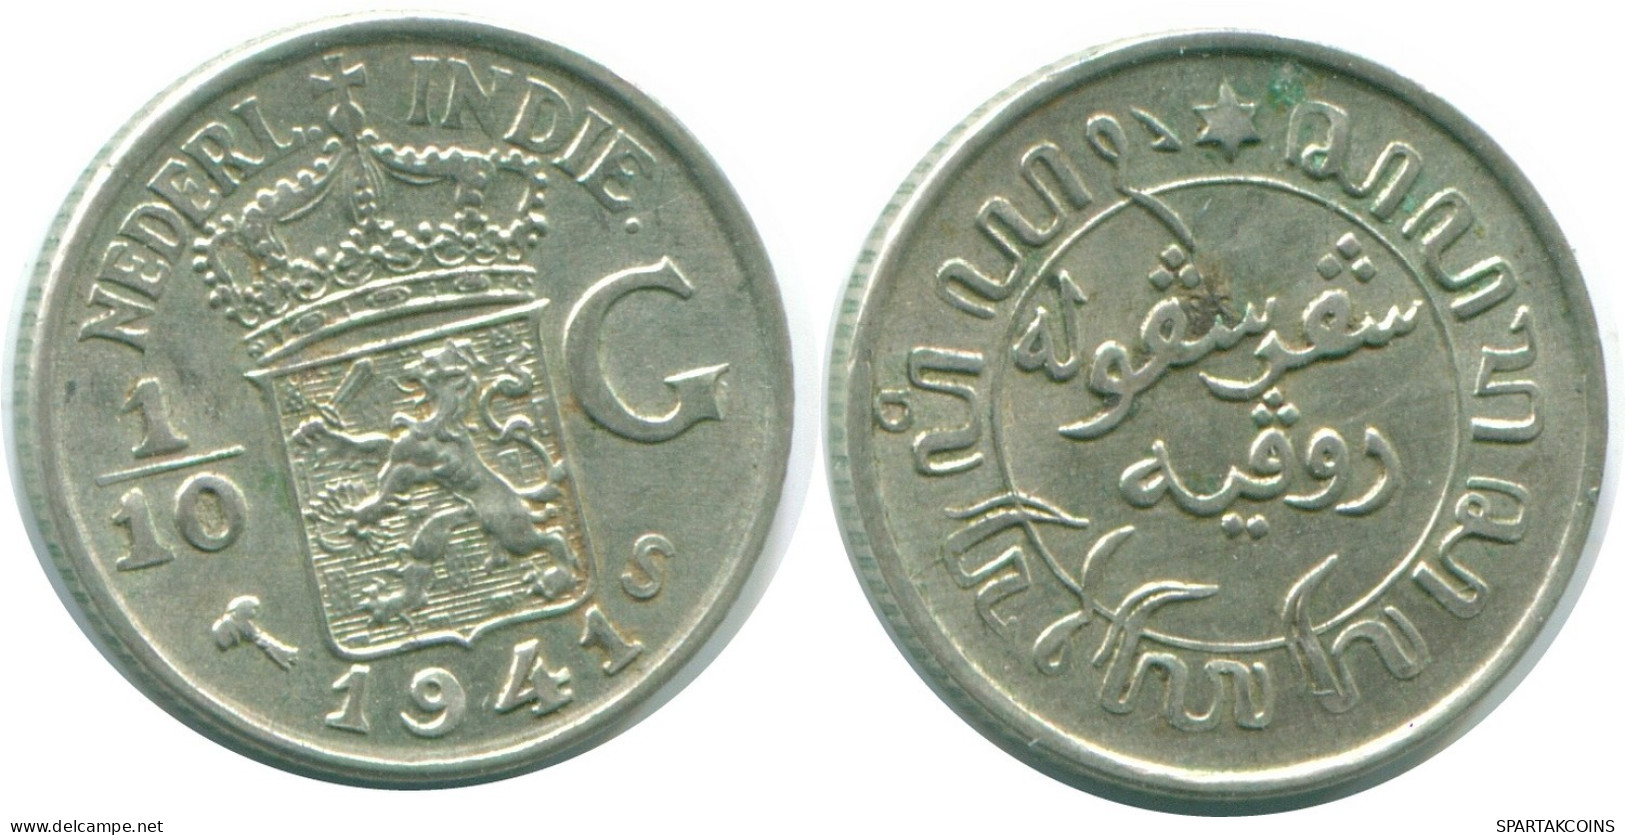 1/10 GULDEN 1941 S NETHERLANDS EAST INDIES SILVER Colonial Coin #NL13634.3.U.A - Indes Neerlandesas